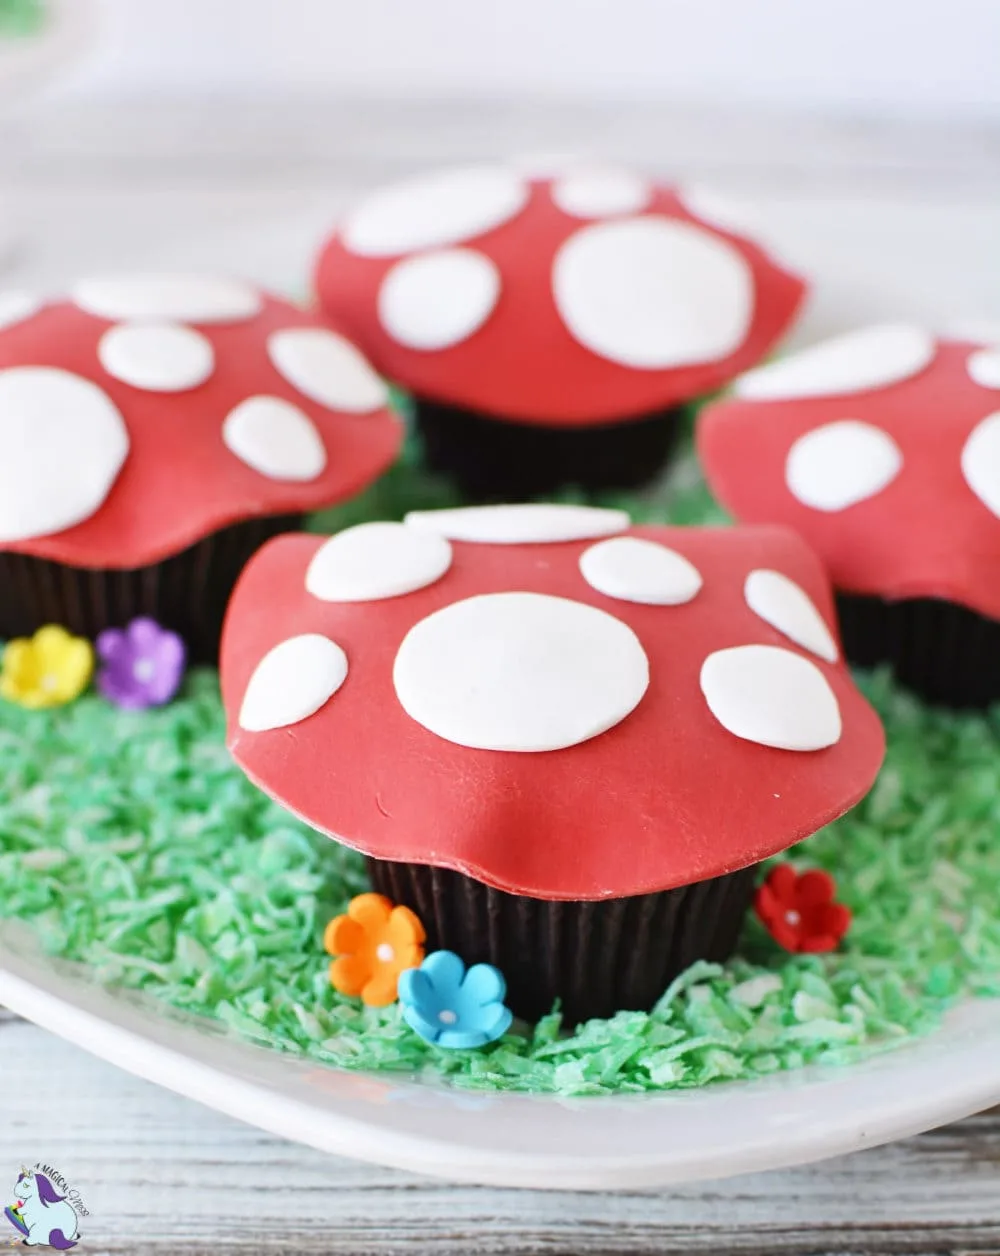 Toadstool cupcakes for a magical woodland fairy themed party!